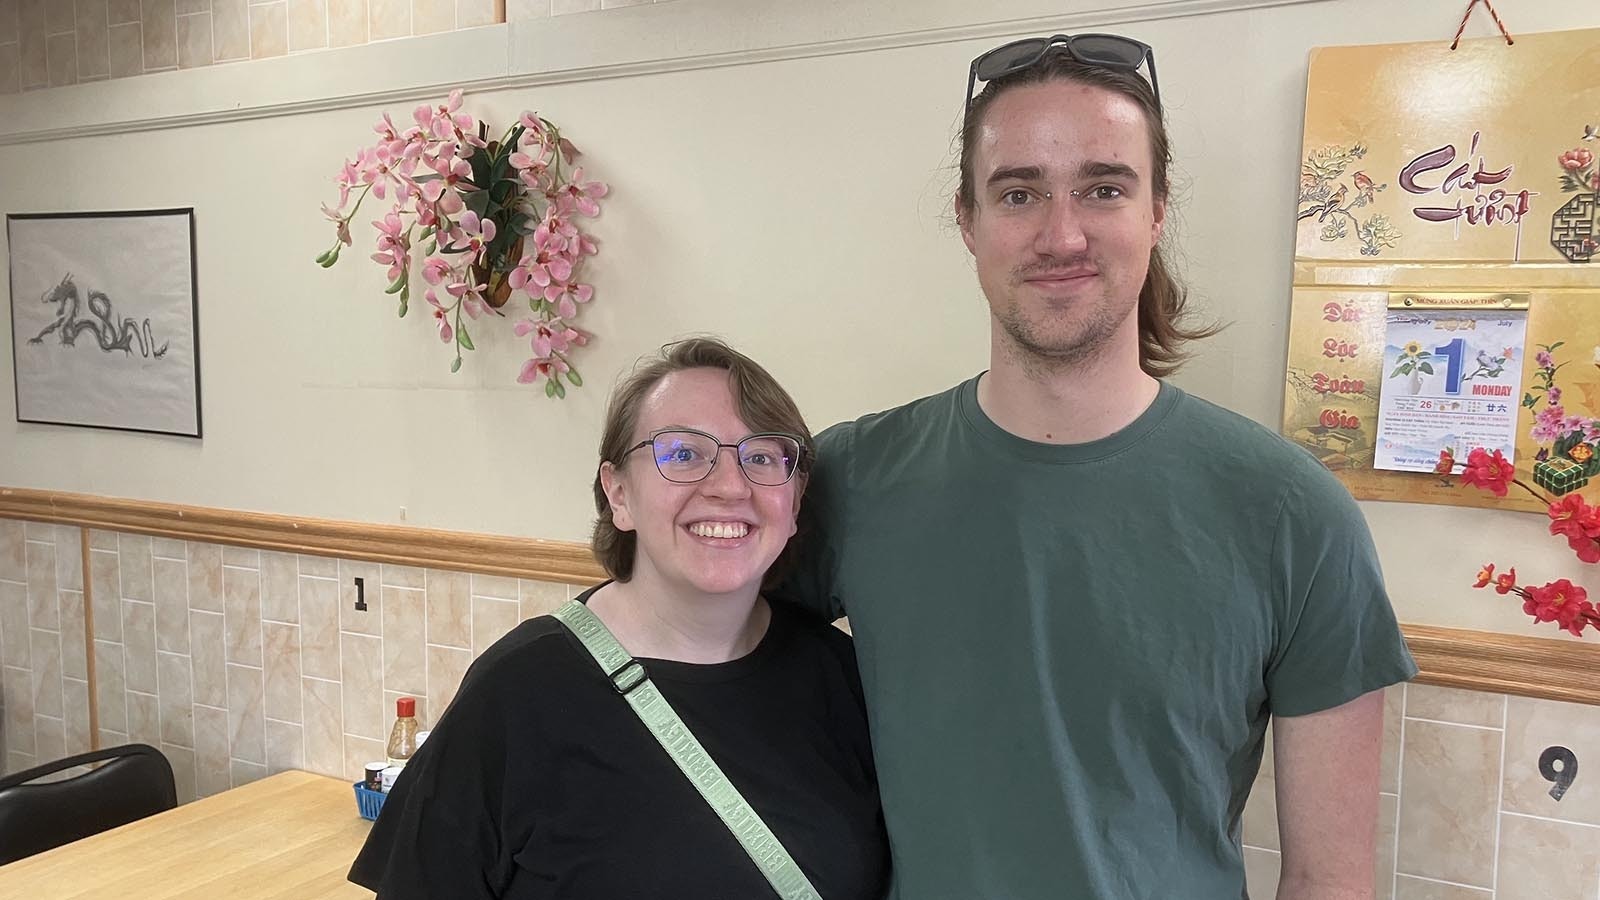 Emma Plett and Nate Holloway ordered takeout from Pho Saigon. Hollway, of Laramie, said he always tries to stop at the restaurant when he is in town.